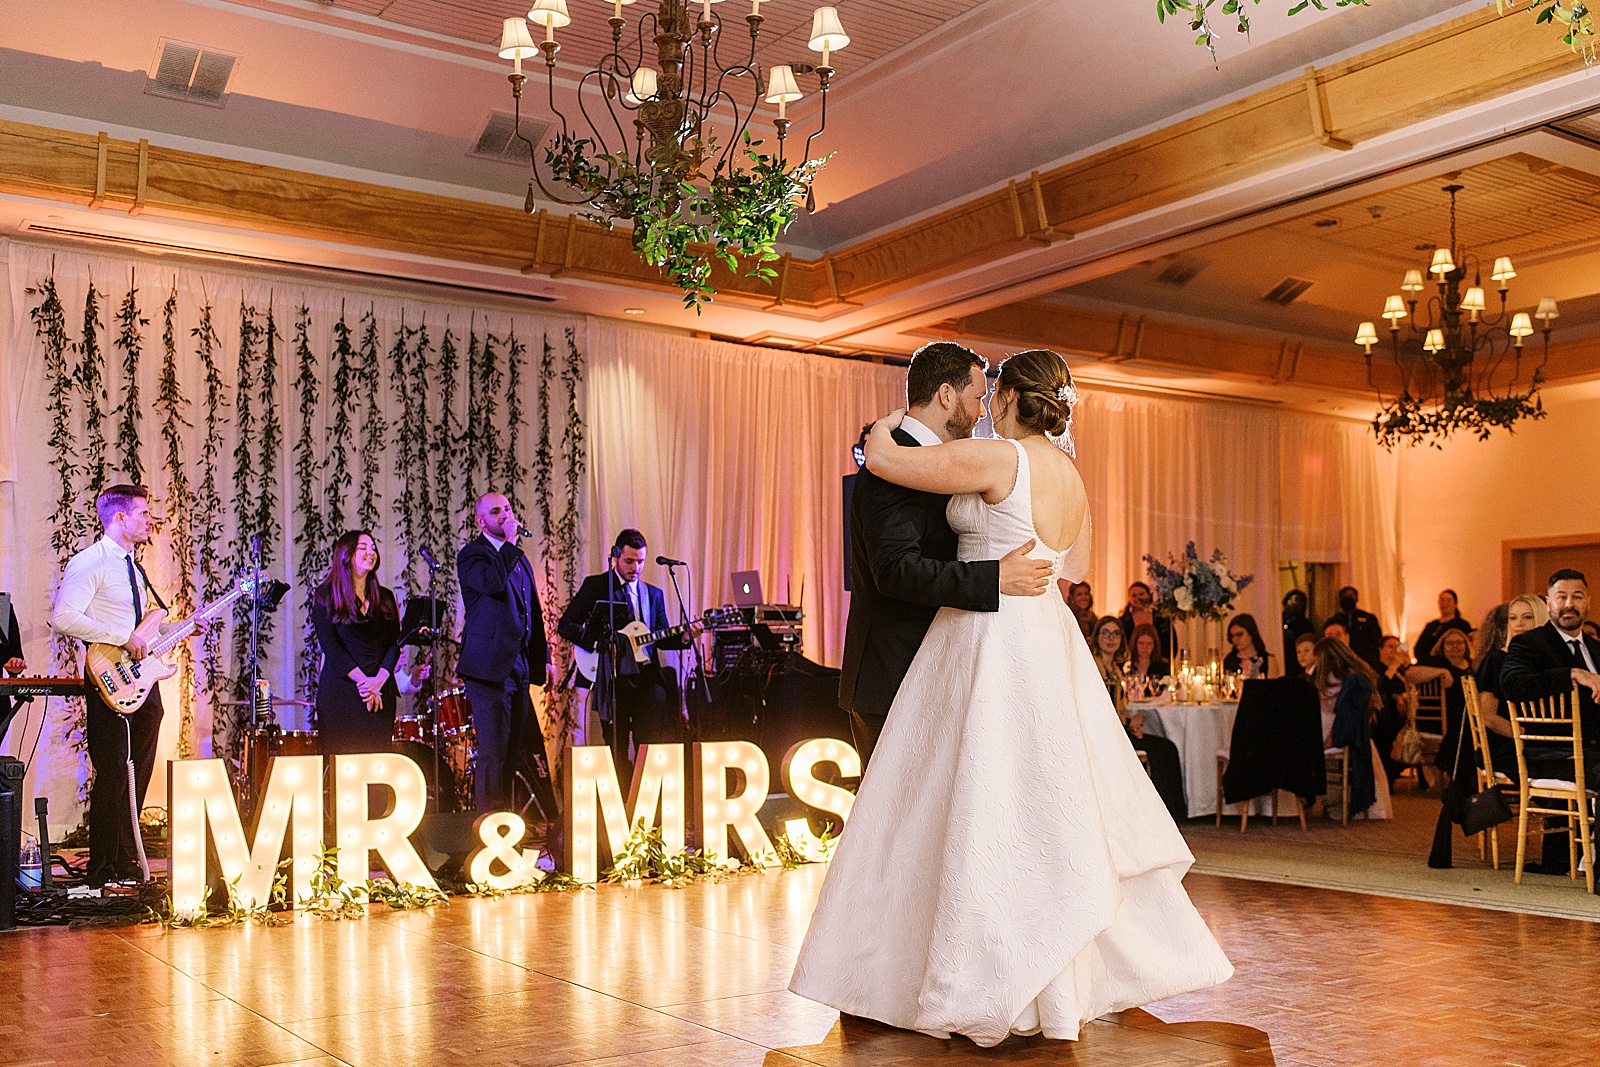 Bride and groom sharing a first dance in front of neon signs